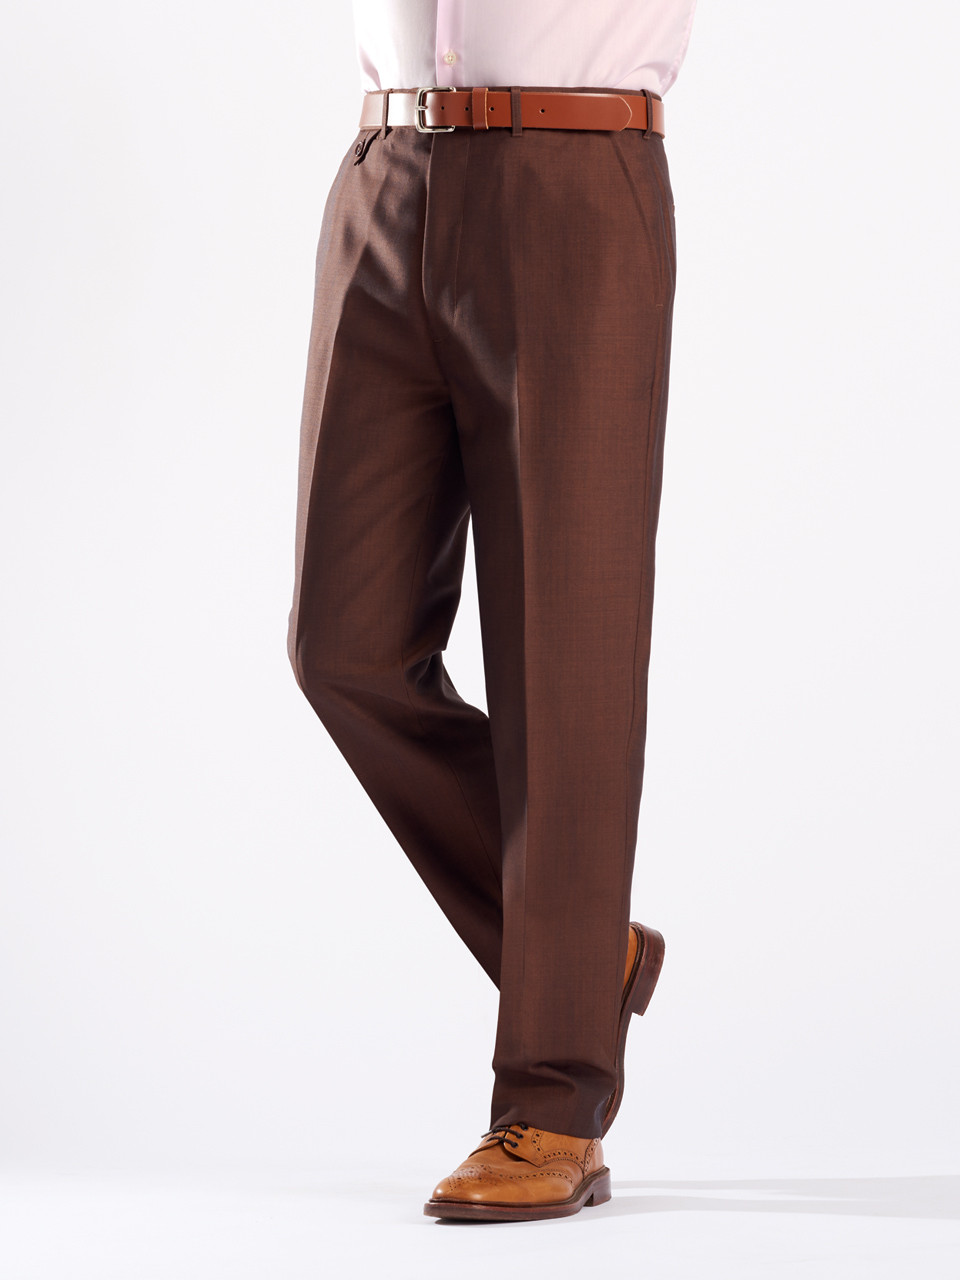 https://cdn11.bigcommerce.com/s-axz3gp0dm3/images/stencil/1280x1280/products/4166/19201/Mens_Chestnut_Luxury_Wool_Mohair_Two_Tone_Trousers_1__29625.1658307739.jpg?c=1